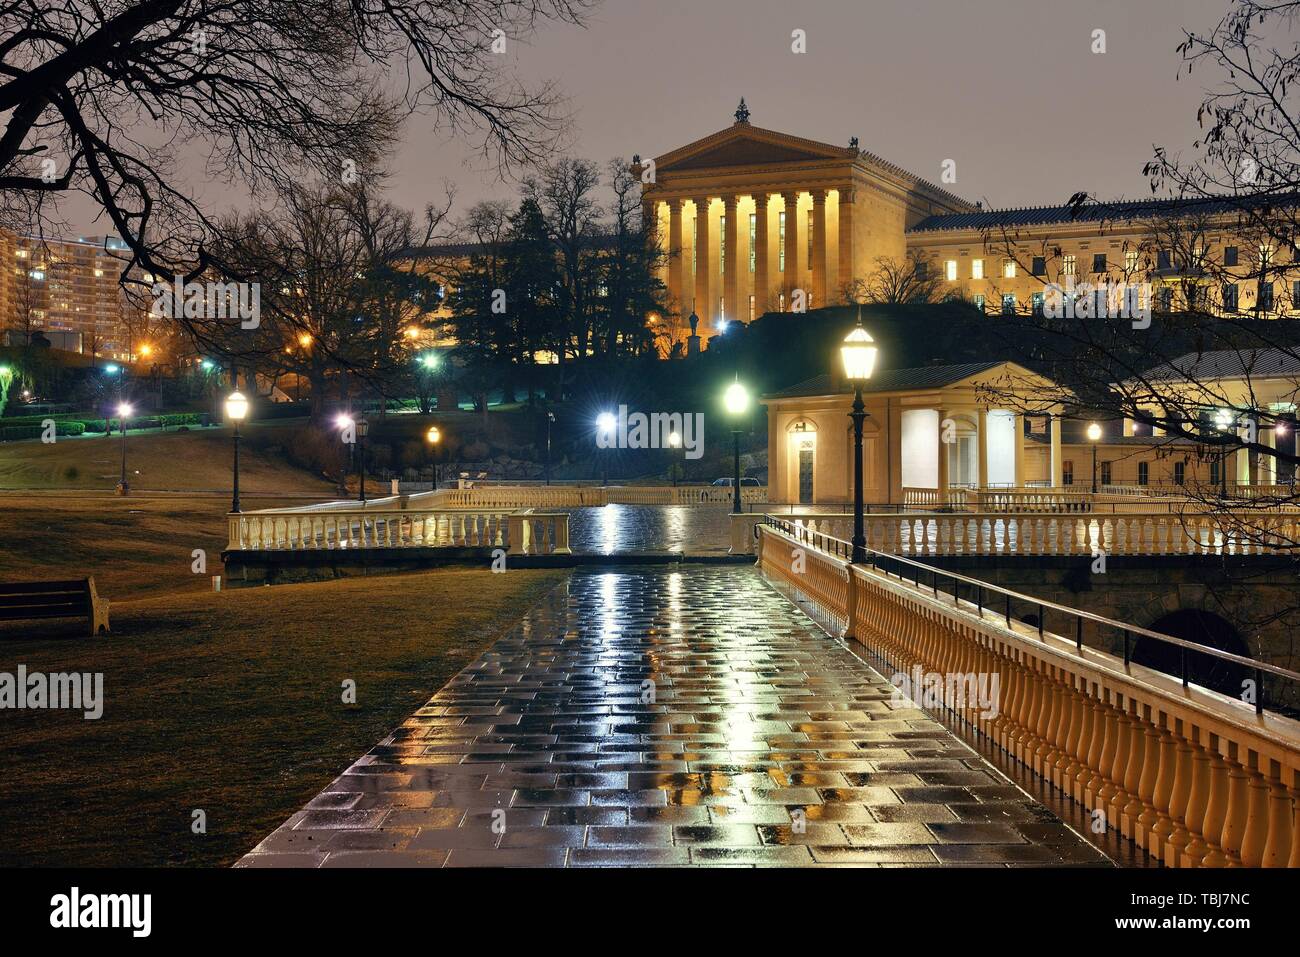 Philadelphia Art Museum at night as the famous city attractions. Stock Photo